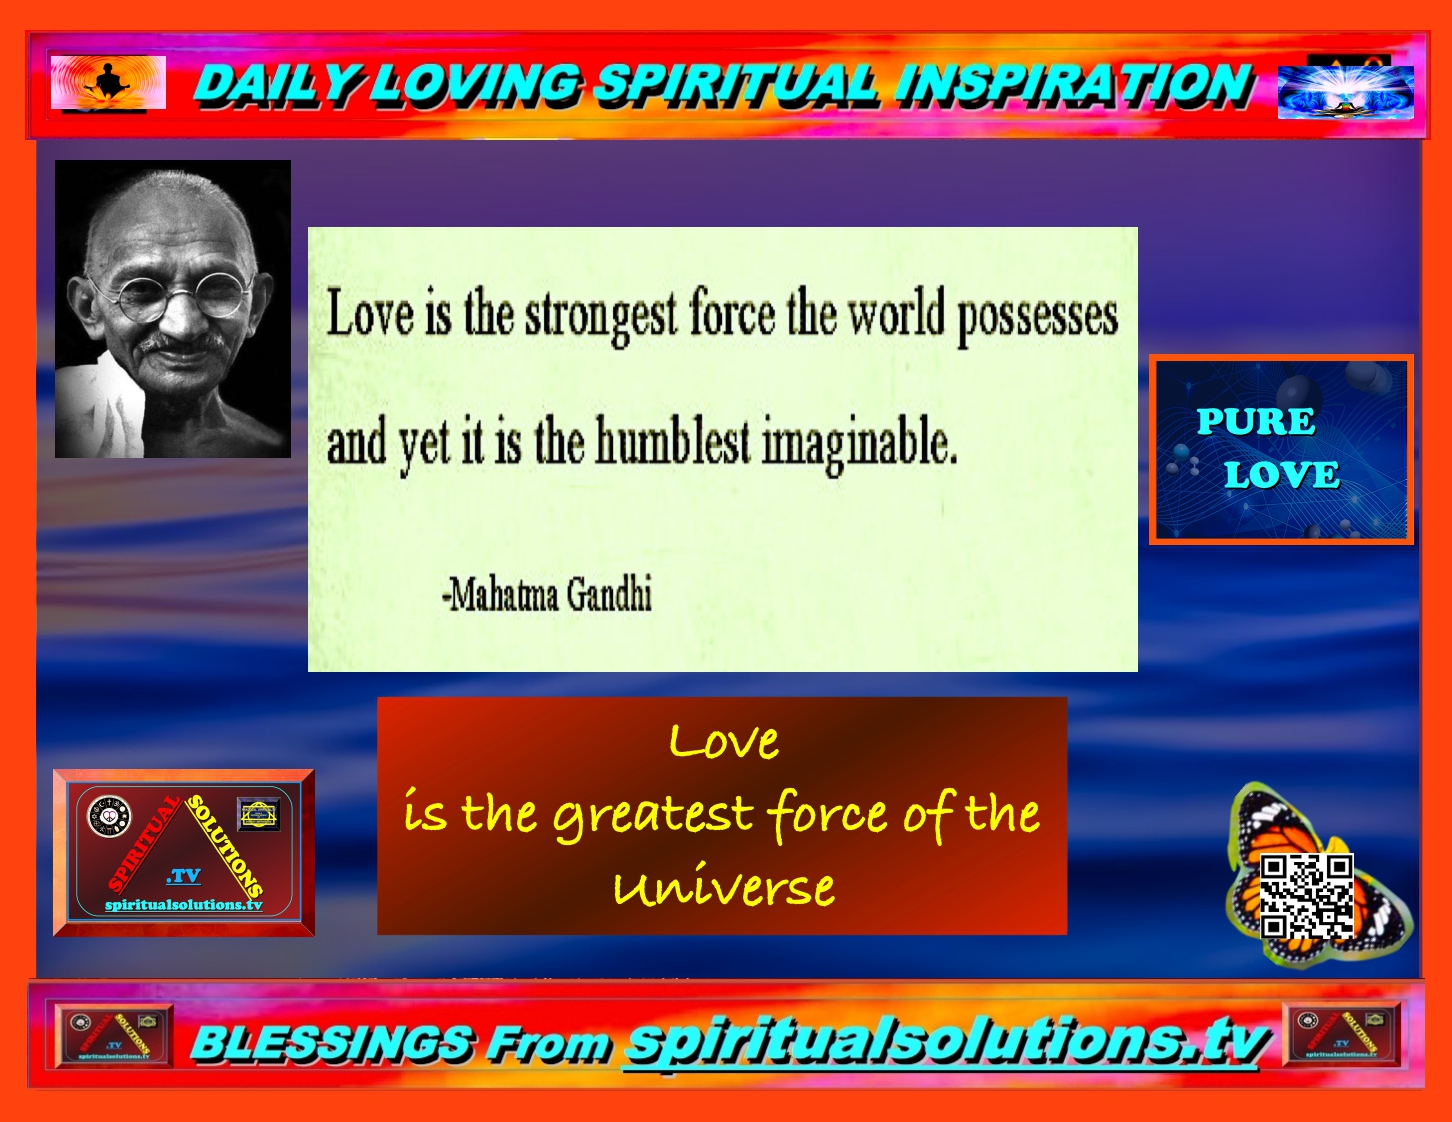 ==========================================DLSI-1-18-23-ECKHART-YOU-ARE-THE-LOVE-AND-JOY-UNDER-THE-PAIN========================================================================DLSI-1-18-23-ECKHART-YOU-ARE-THE-LOVE-AND-JOY-UNDER-THE-PAIN==